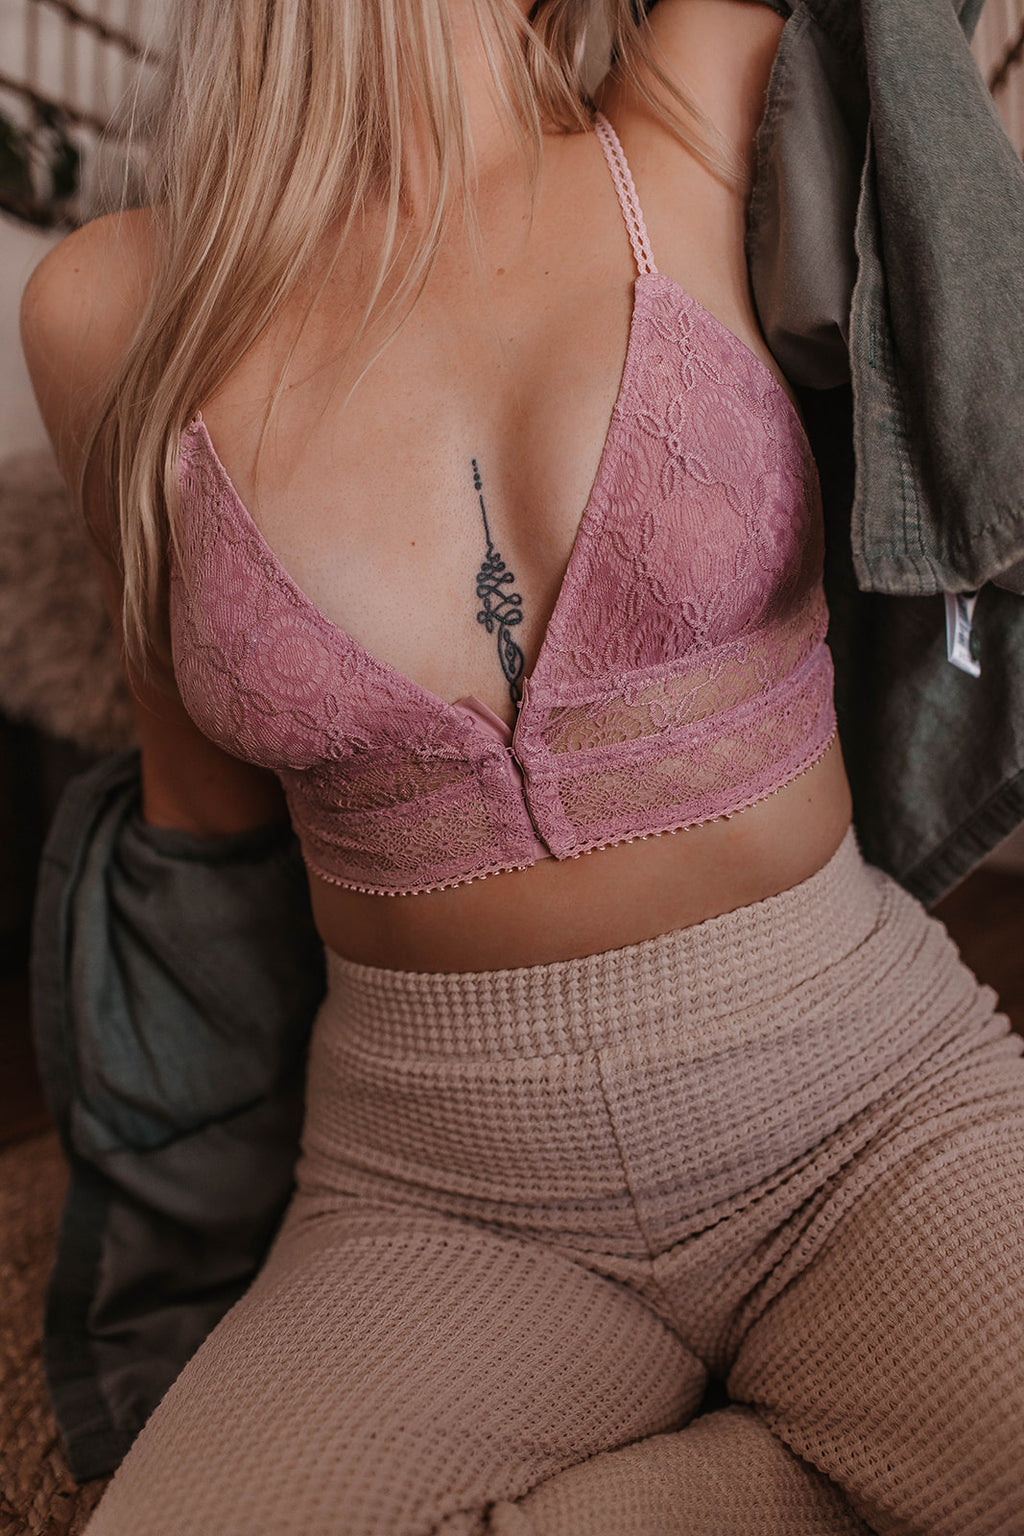 April 2021s Bralette – Layered With Lace